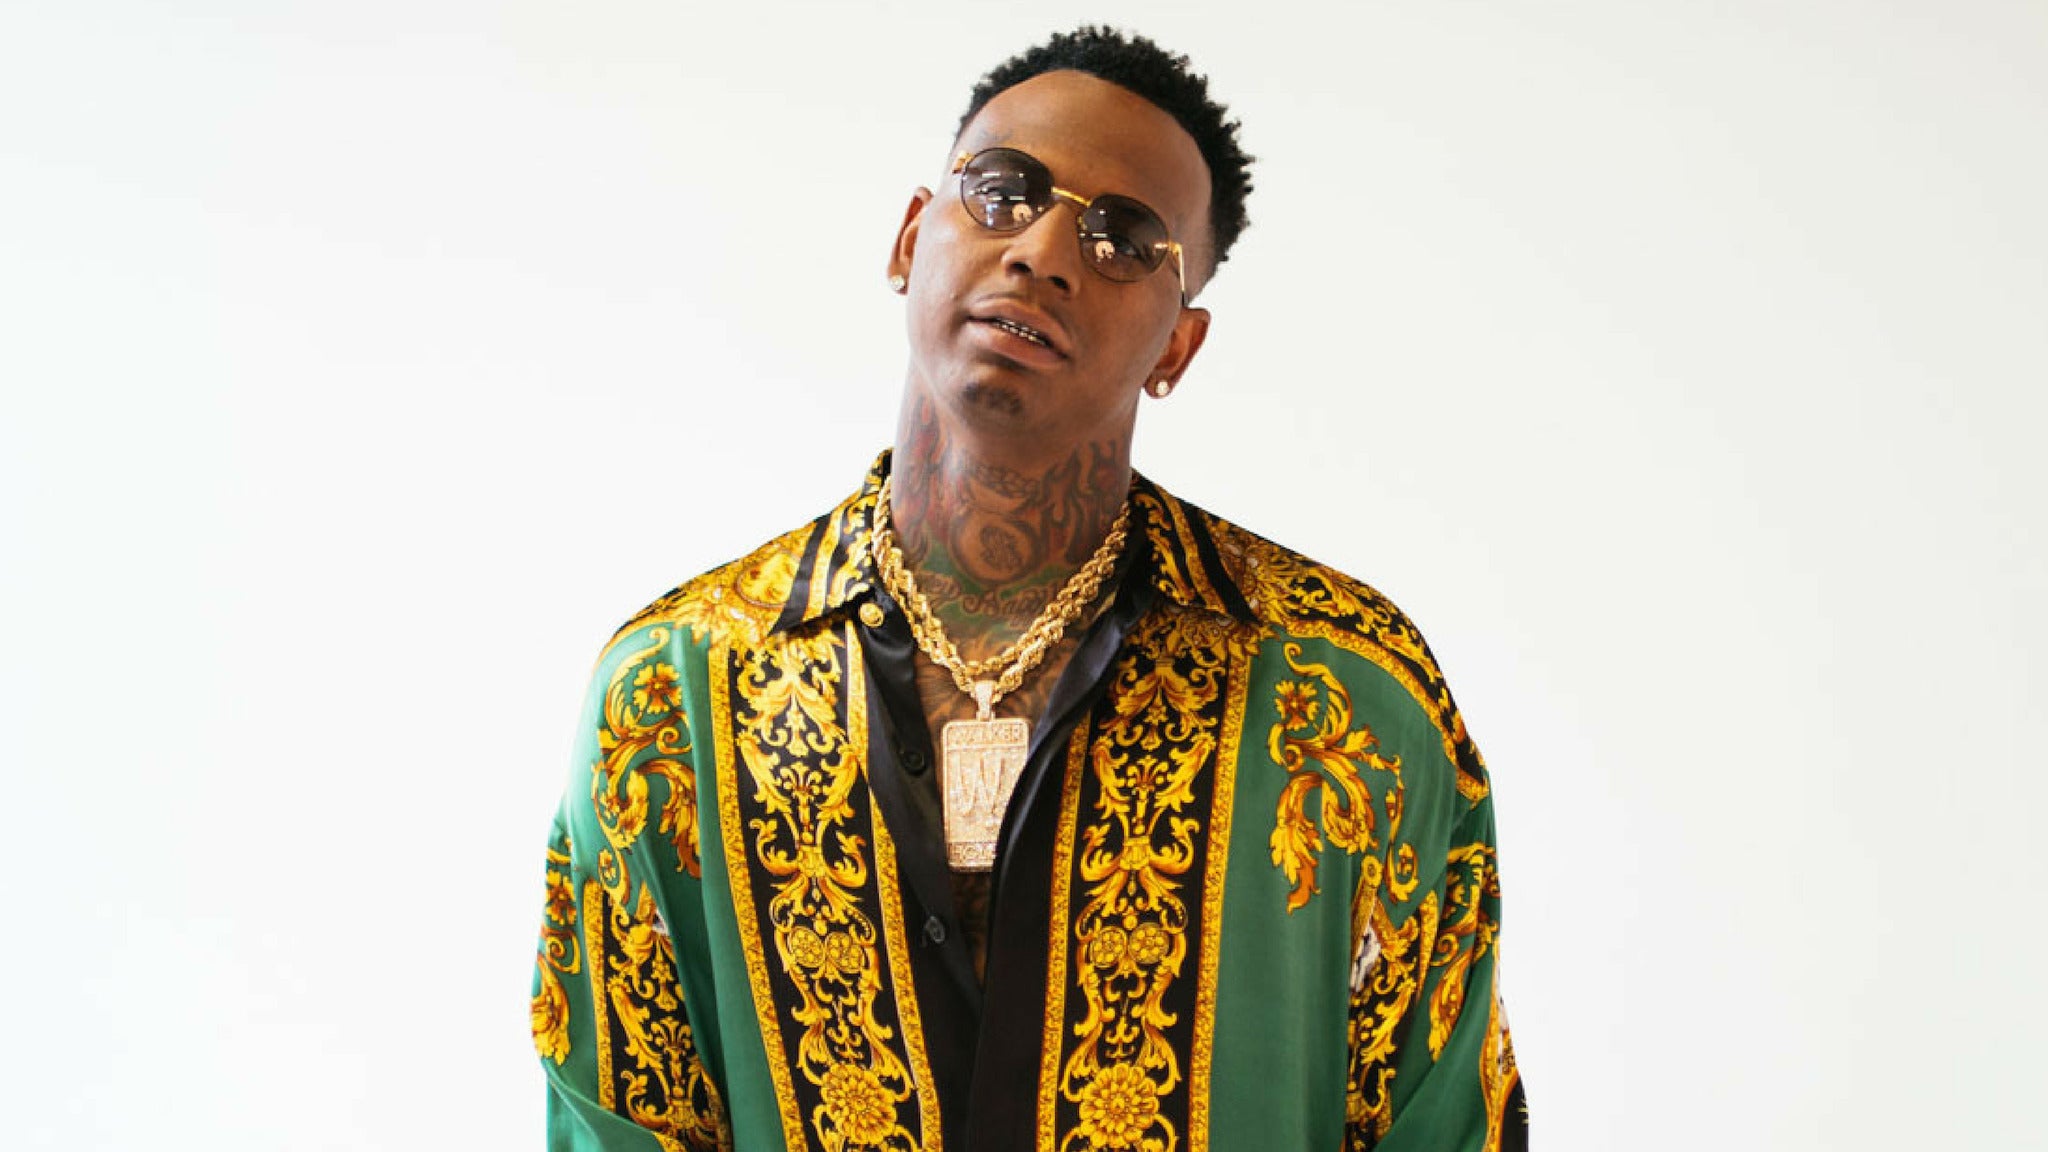 Moneybagg Yo - Word 4 Word Tour in Houston promo photo for Live Nation presale offer code